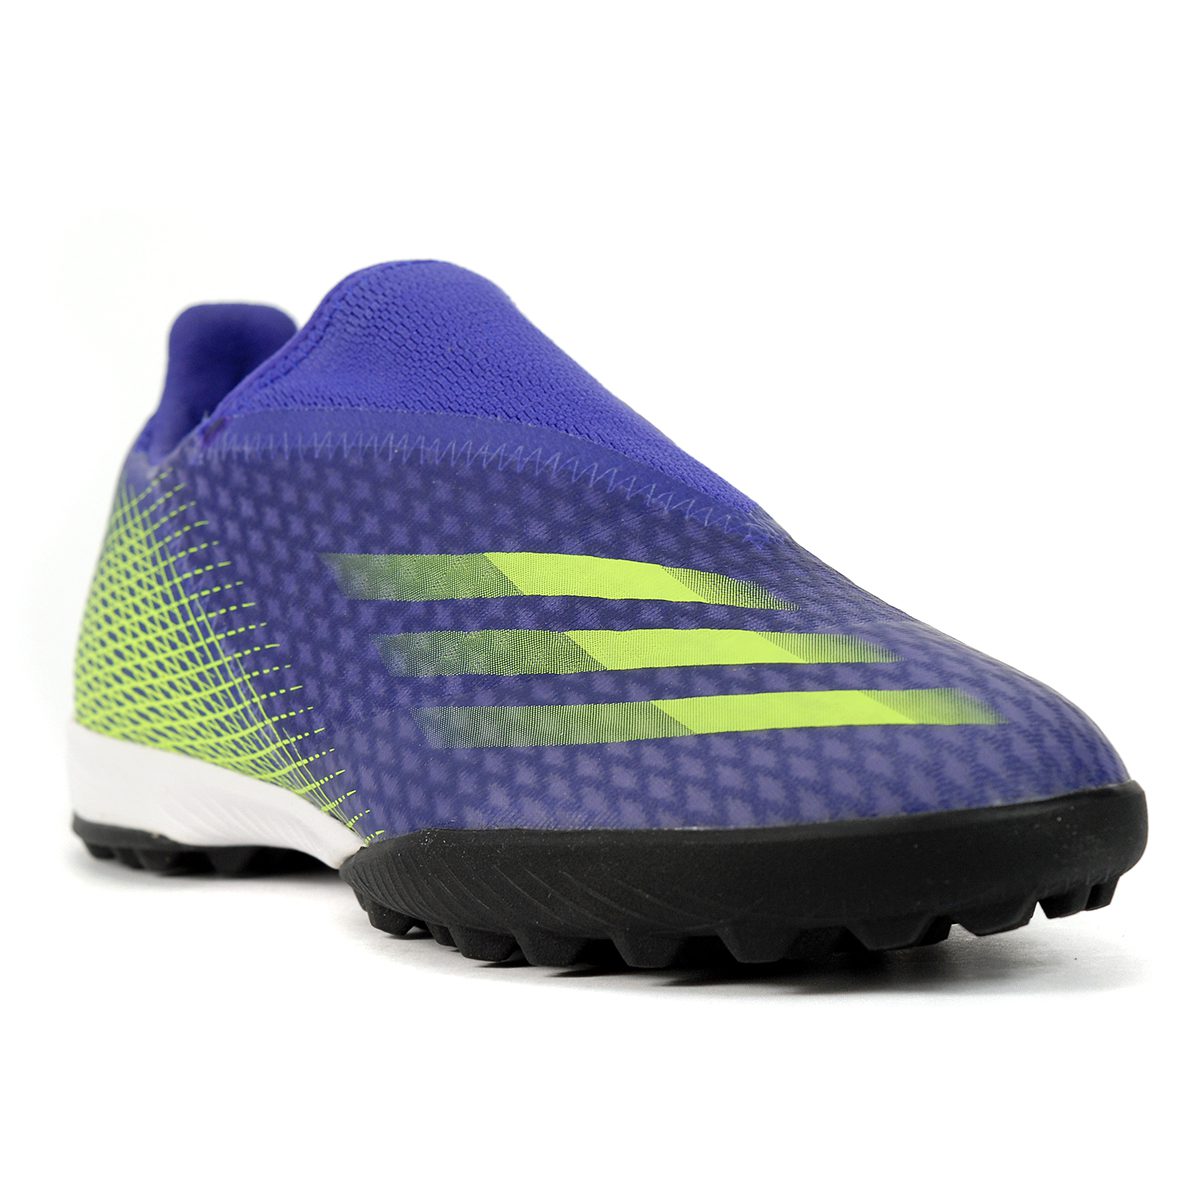 Adidas Men's x ghosted laceless X Ghosted.3 Energy Ink/Signal Green Laceless Turf